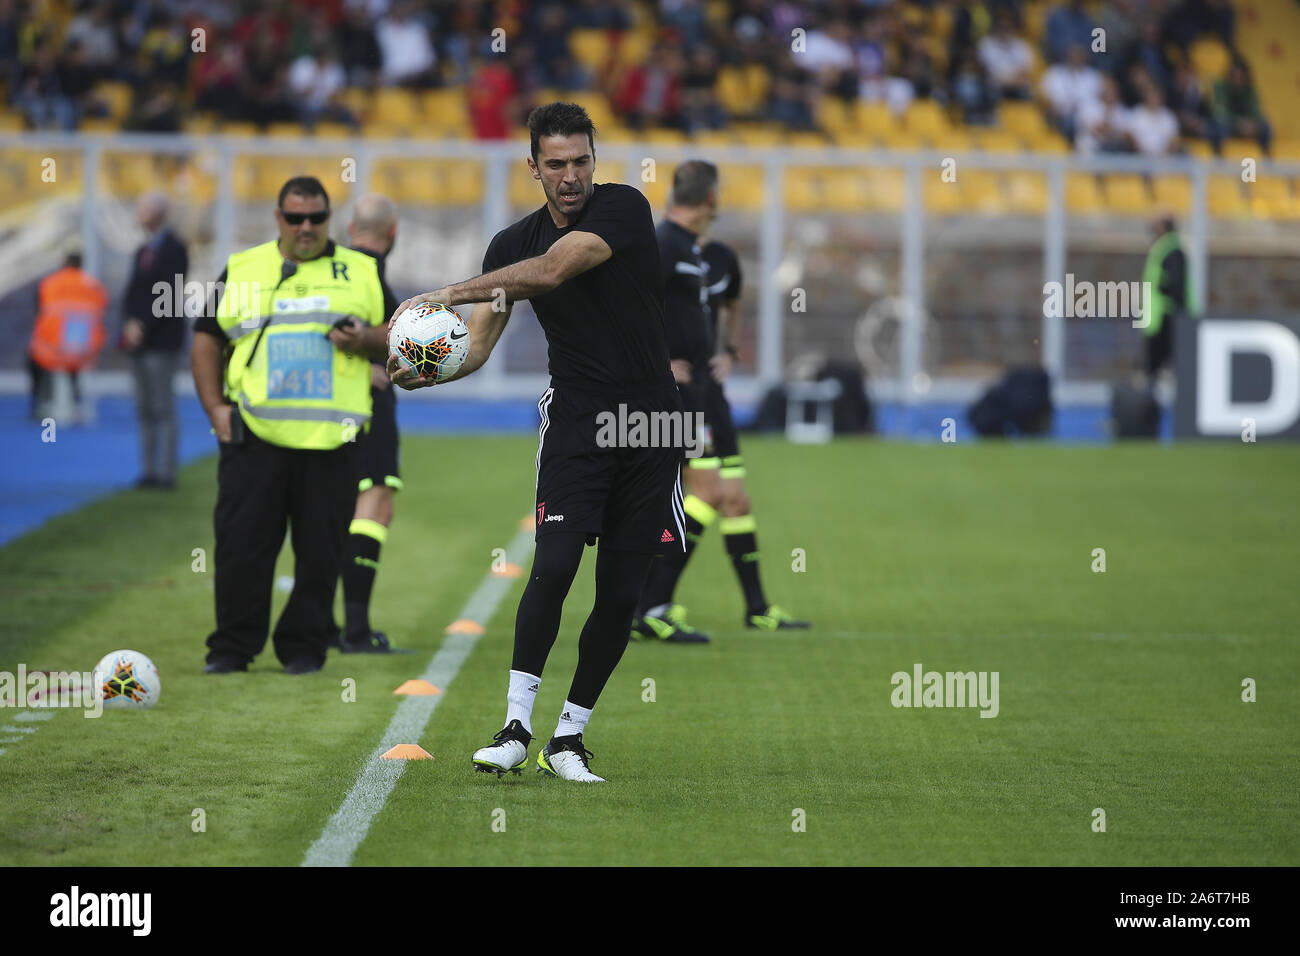 Lecce, Italy. 26th Oct, 2019. soccer, SERIES A TIM CHAMPIONSHIP 20189-20 LECCE - JUVENTUS 1-1 in the picture: BUFFON warming up Credit: Independent Photo Agency/Alamy Live News Stock Photo